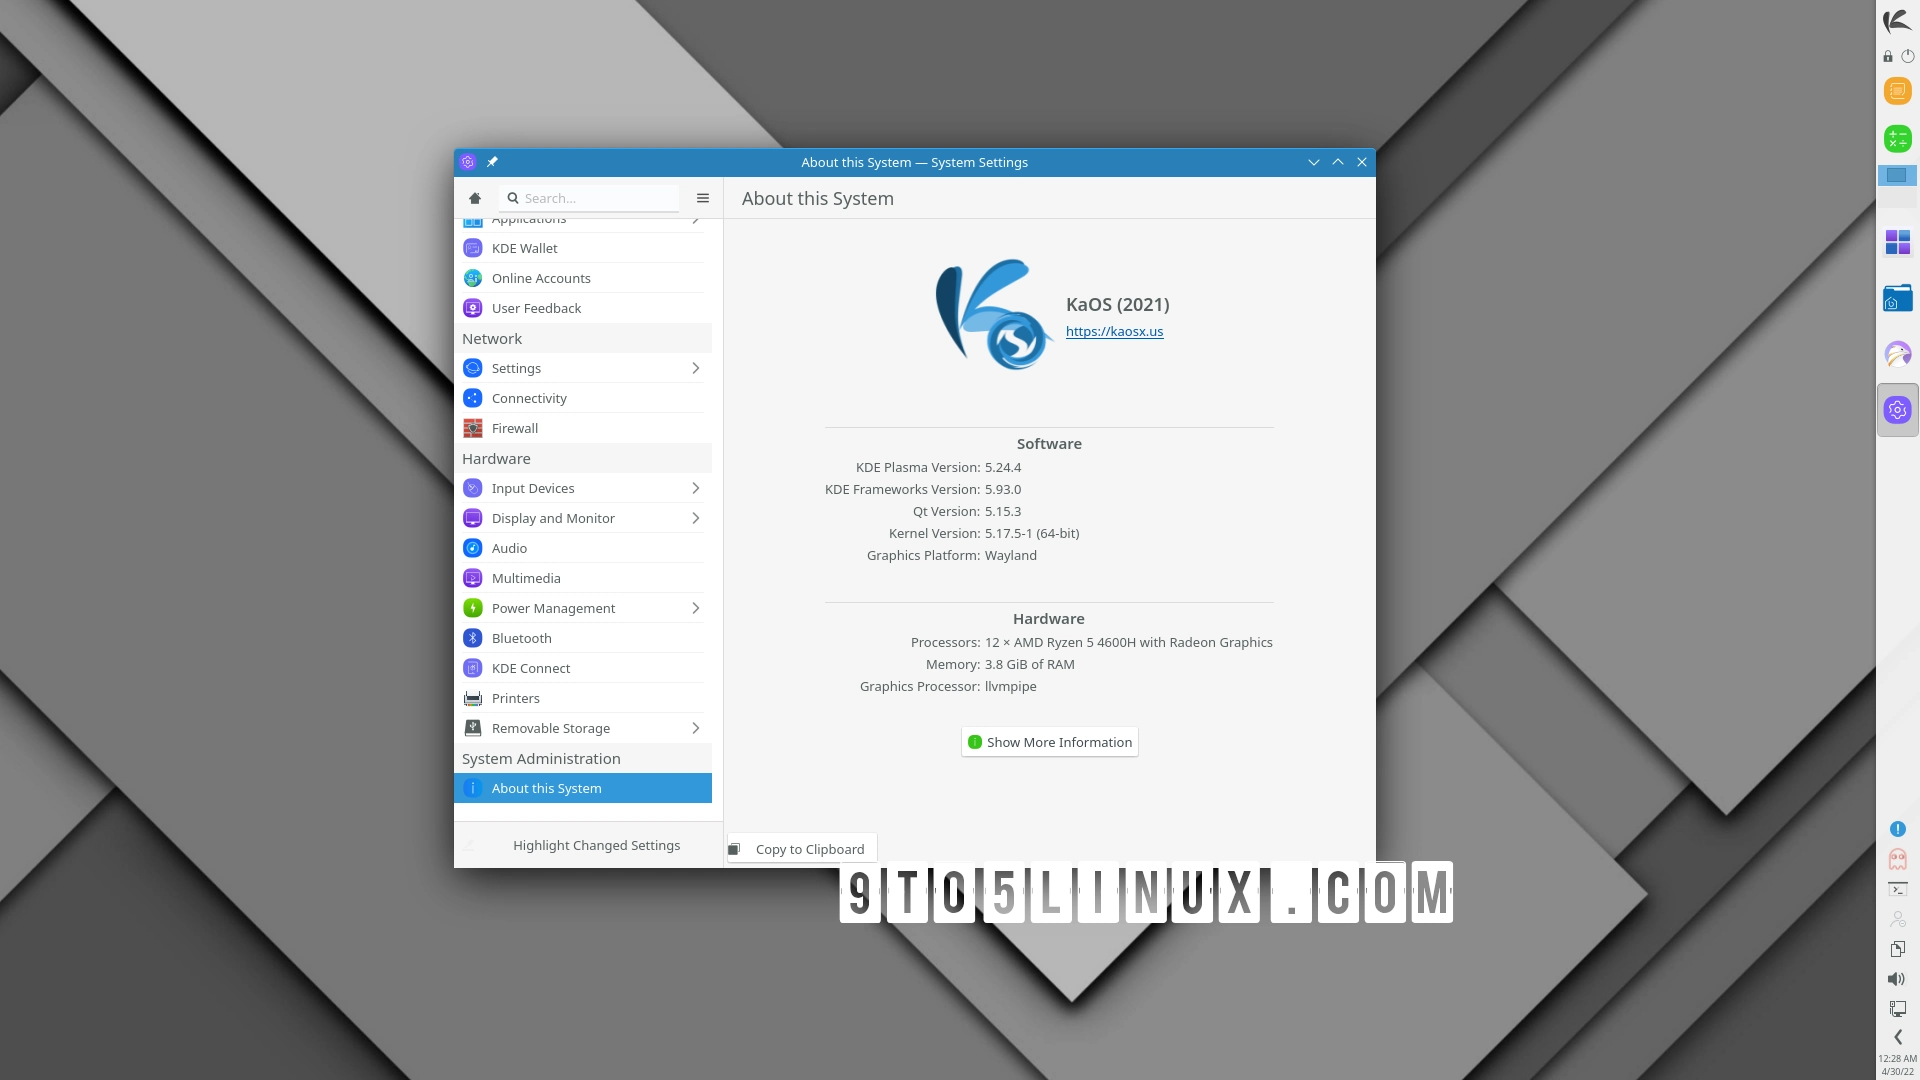 Arch Linux-Inspired KaOS 2022.04 Distro Arrives with Linux 5.17 and Latest KDE Goodies